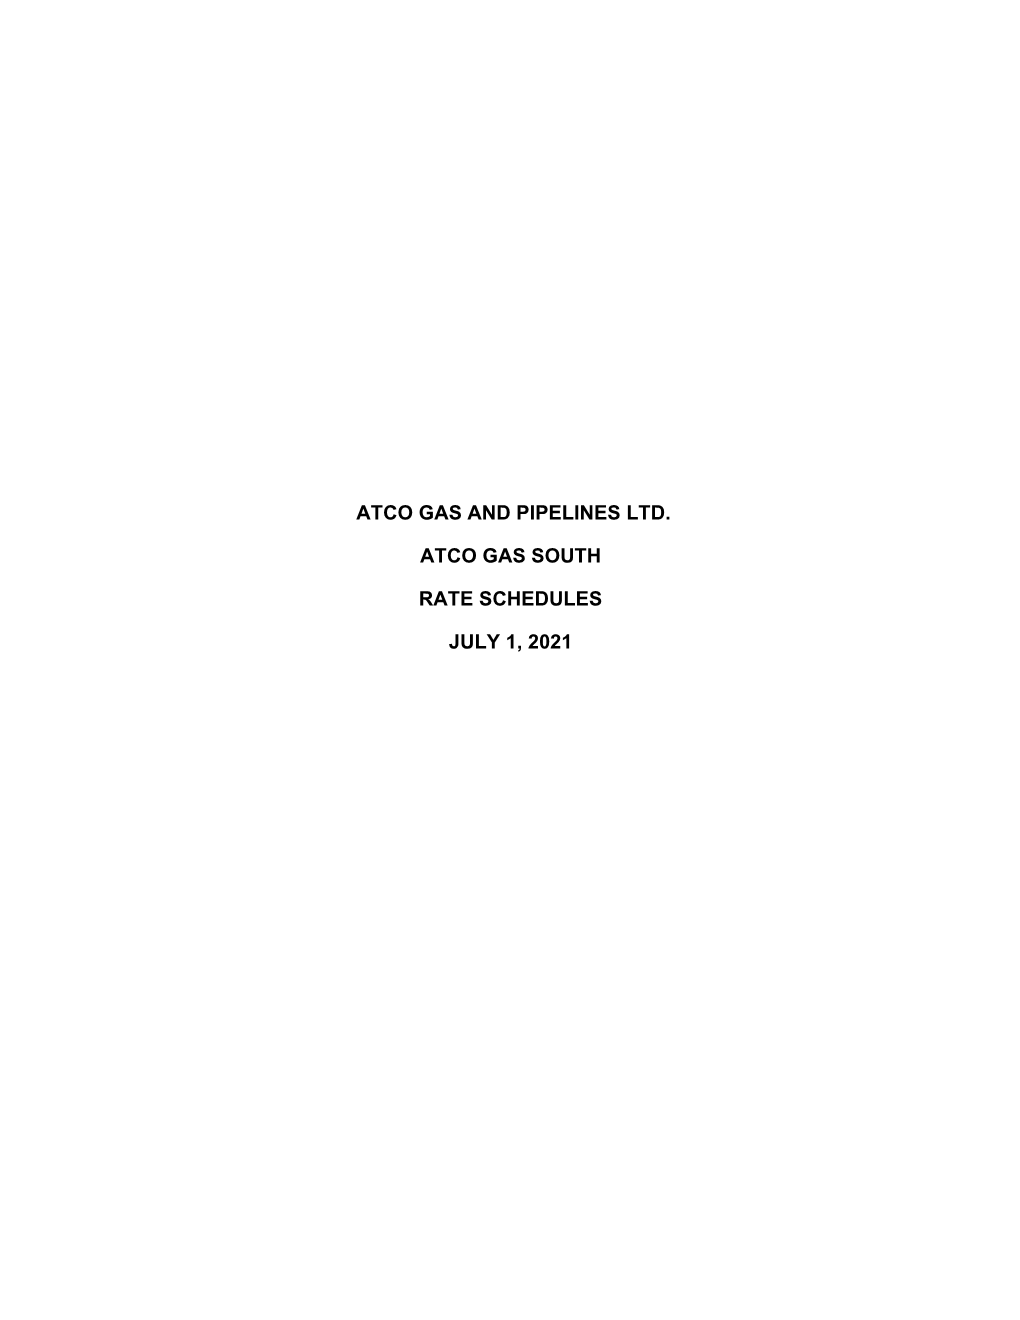 Atco Gas and Pipelines Ltd. Atco Gas South Rate